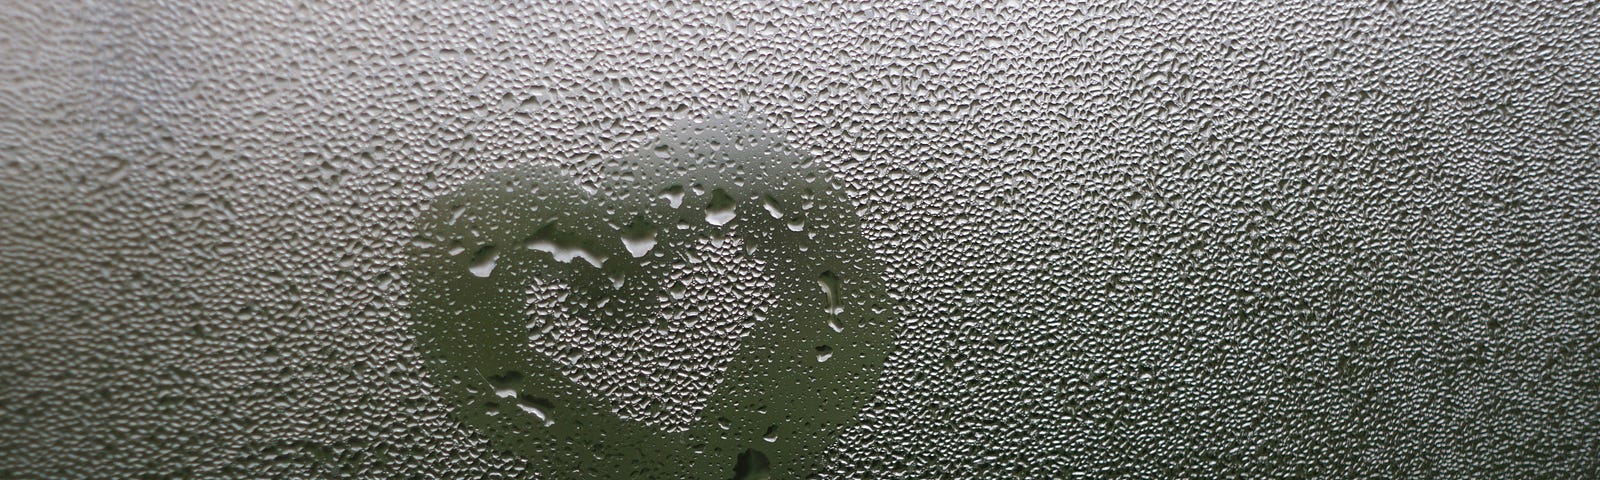 Heart drawn in condensation on a window